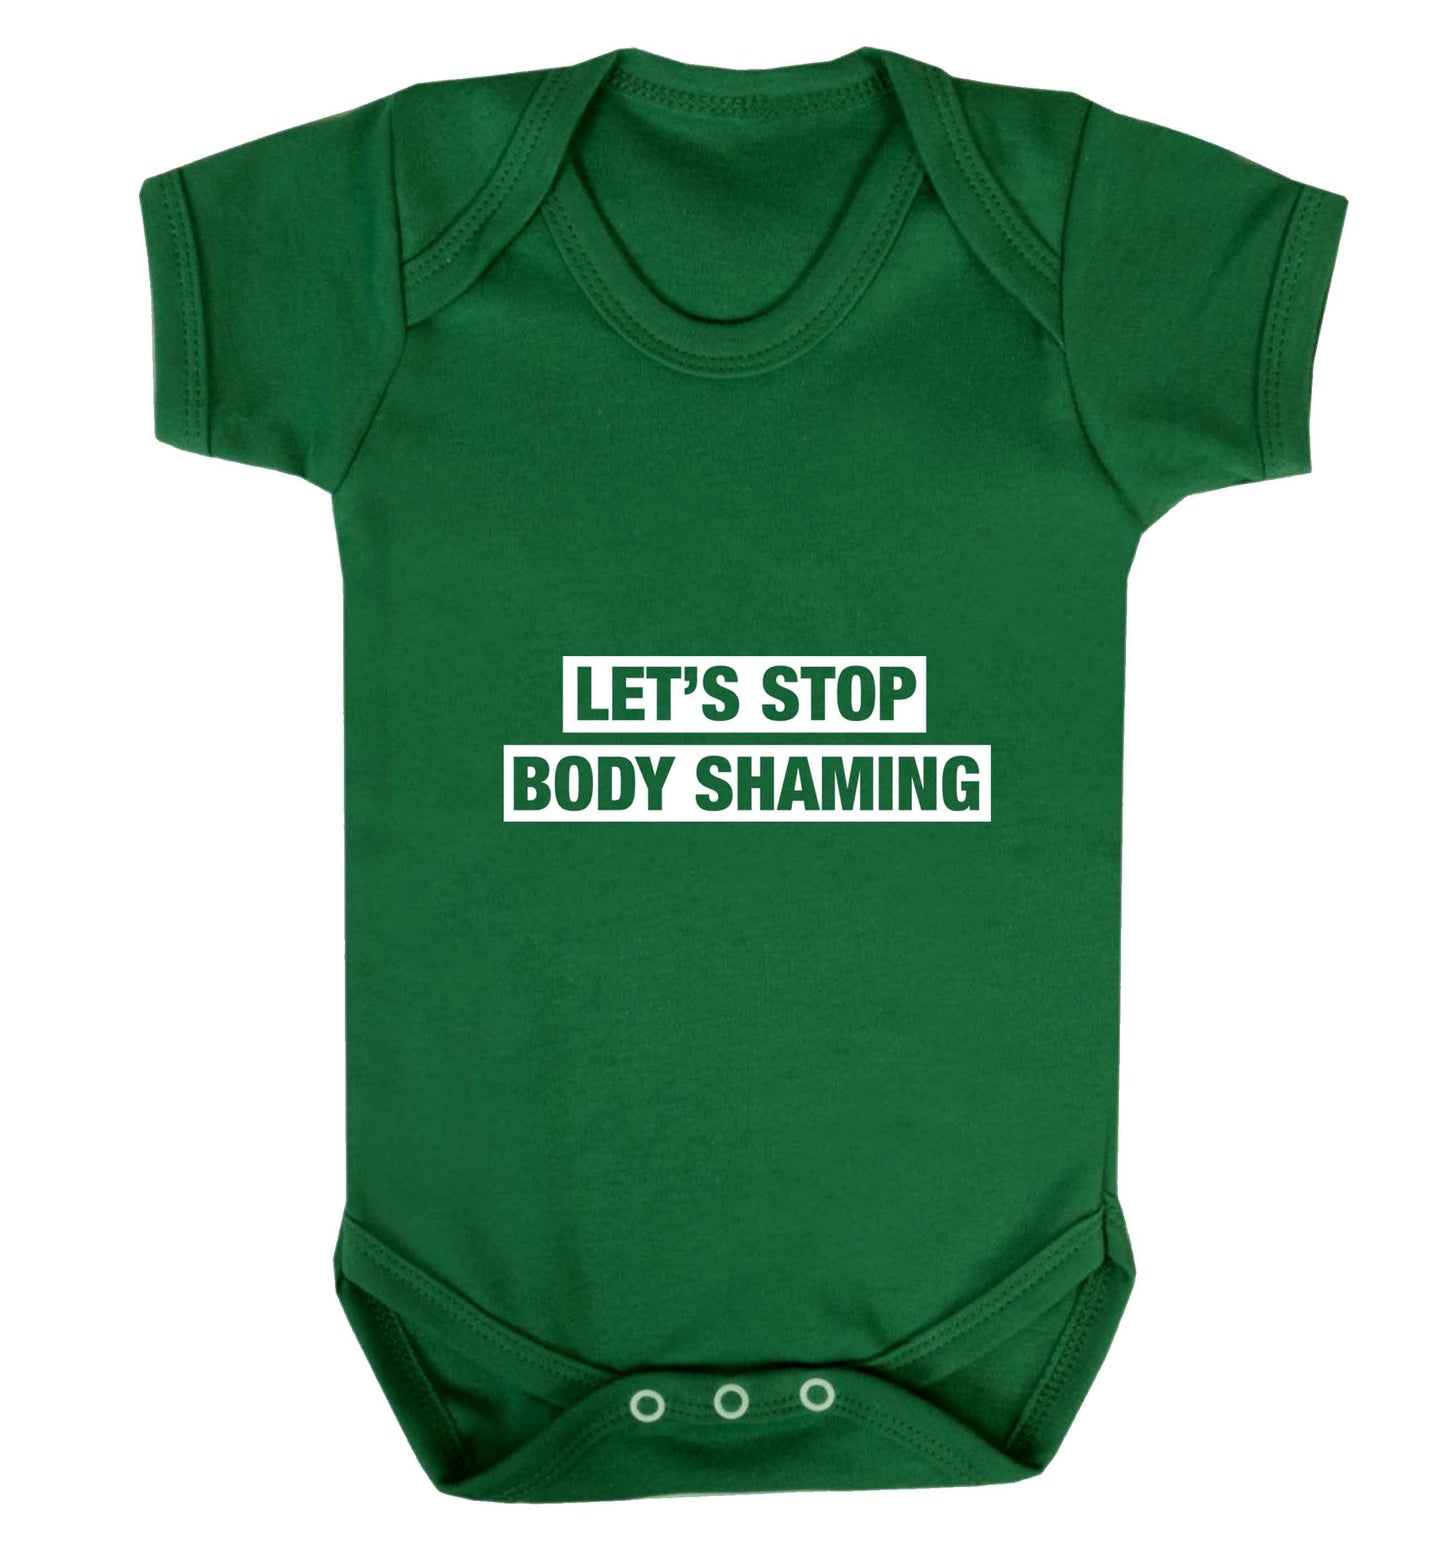 Let's stop body shaming baby vest green 18-24 months